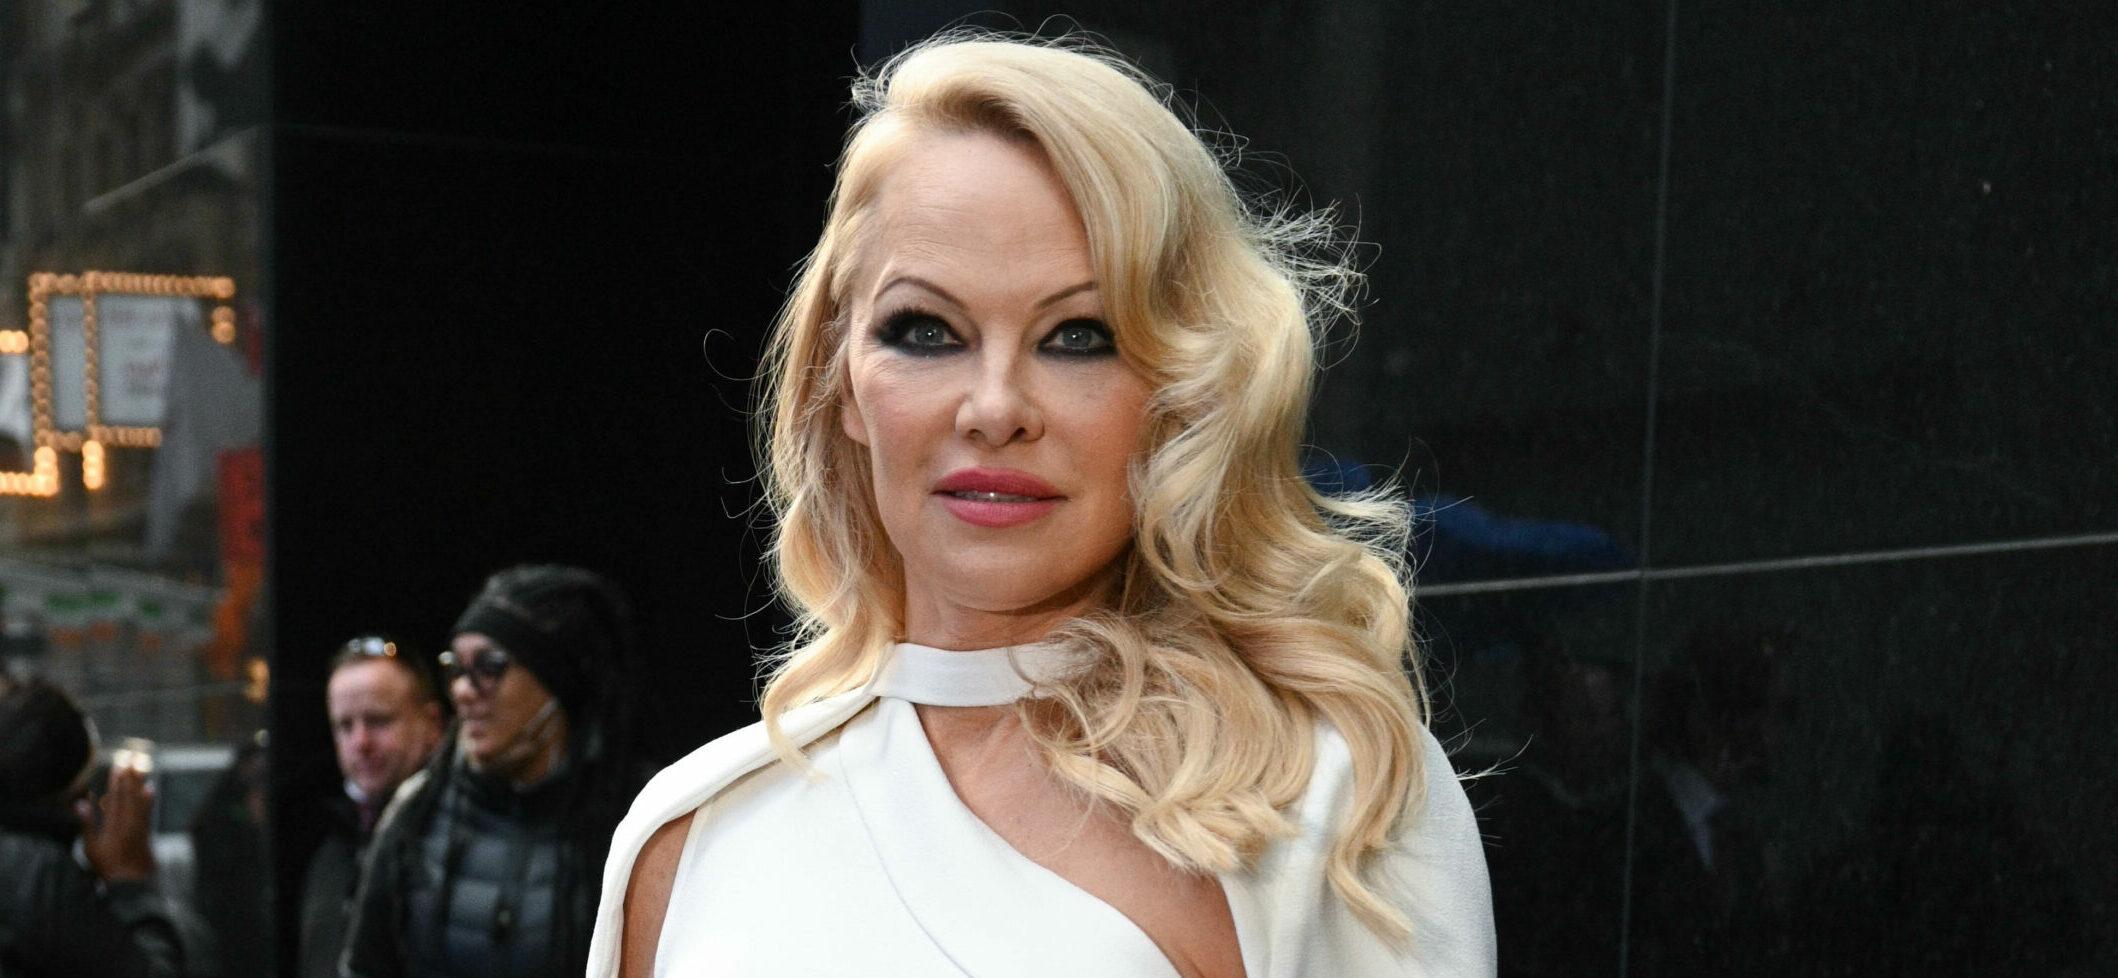 Pamela Anderson Is Super Excited About Her Broadway Debut In ‘Chicago,’ It’s Her Moment ‘To Shine’